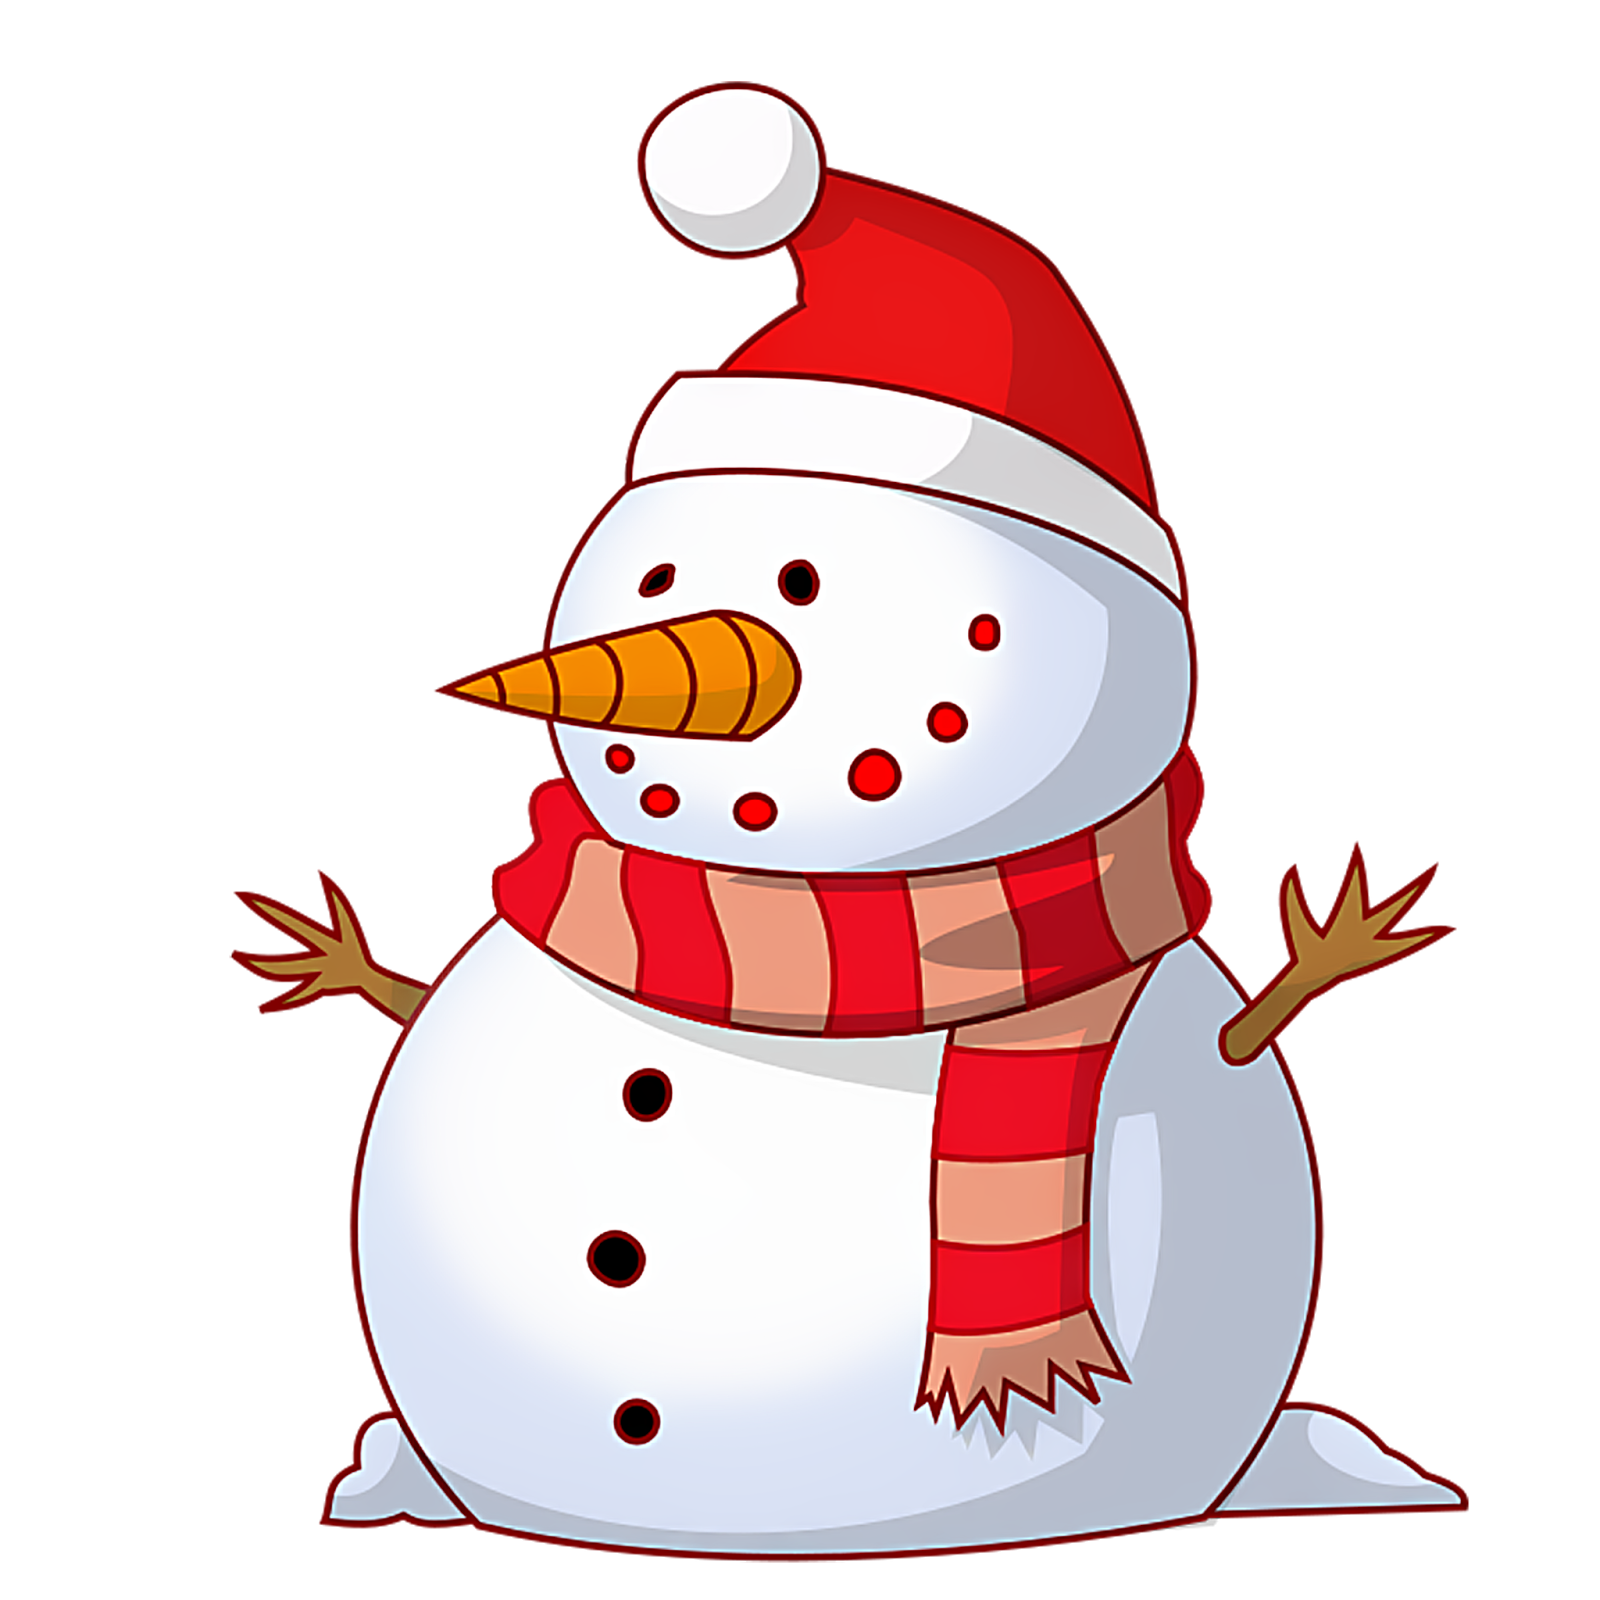 Snowman PNG images free download